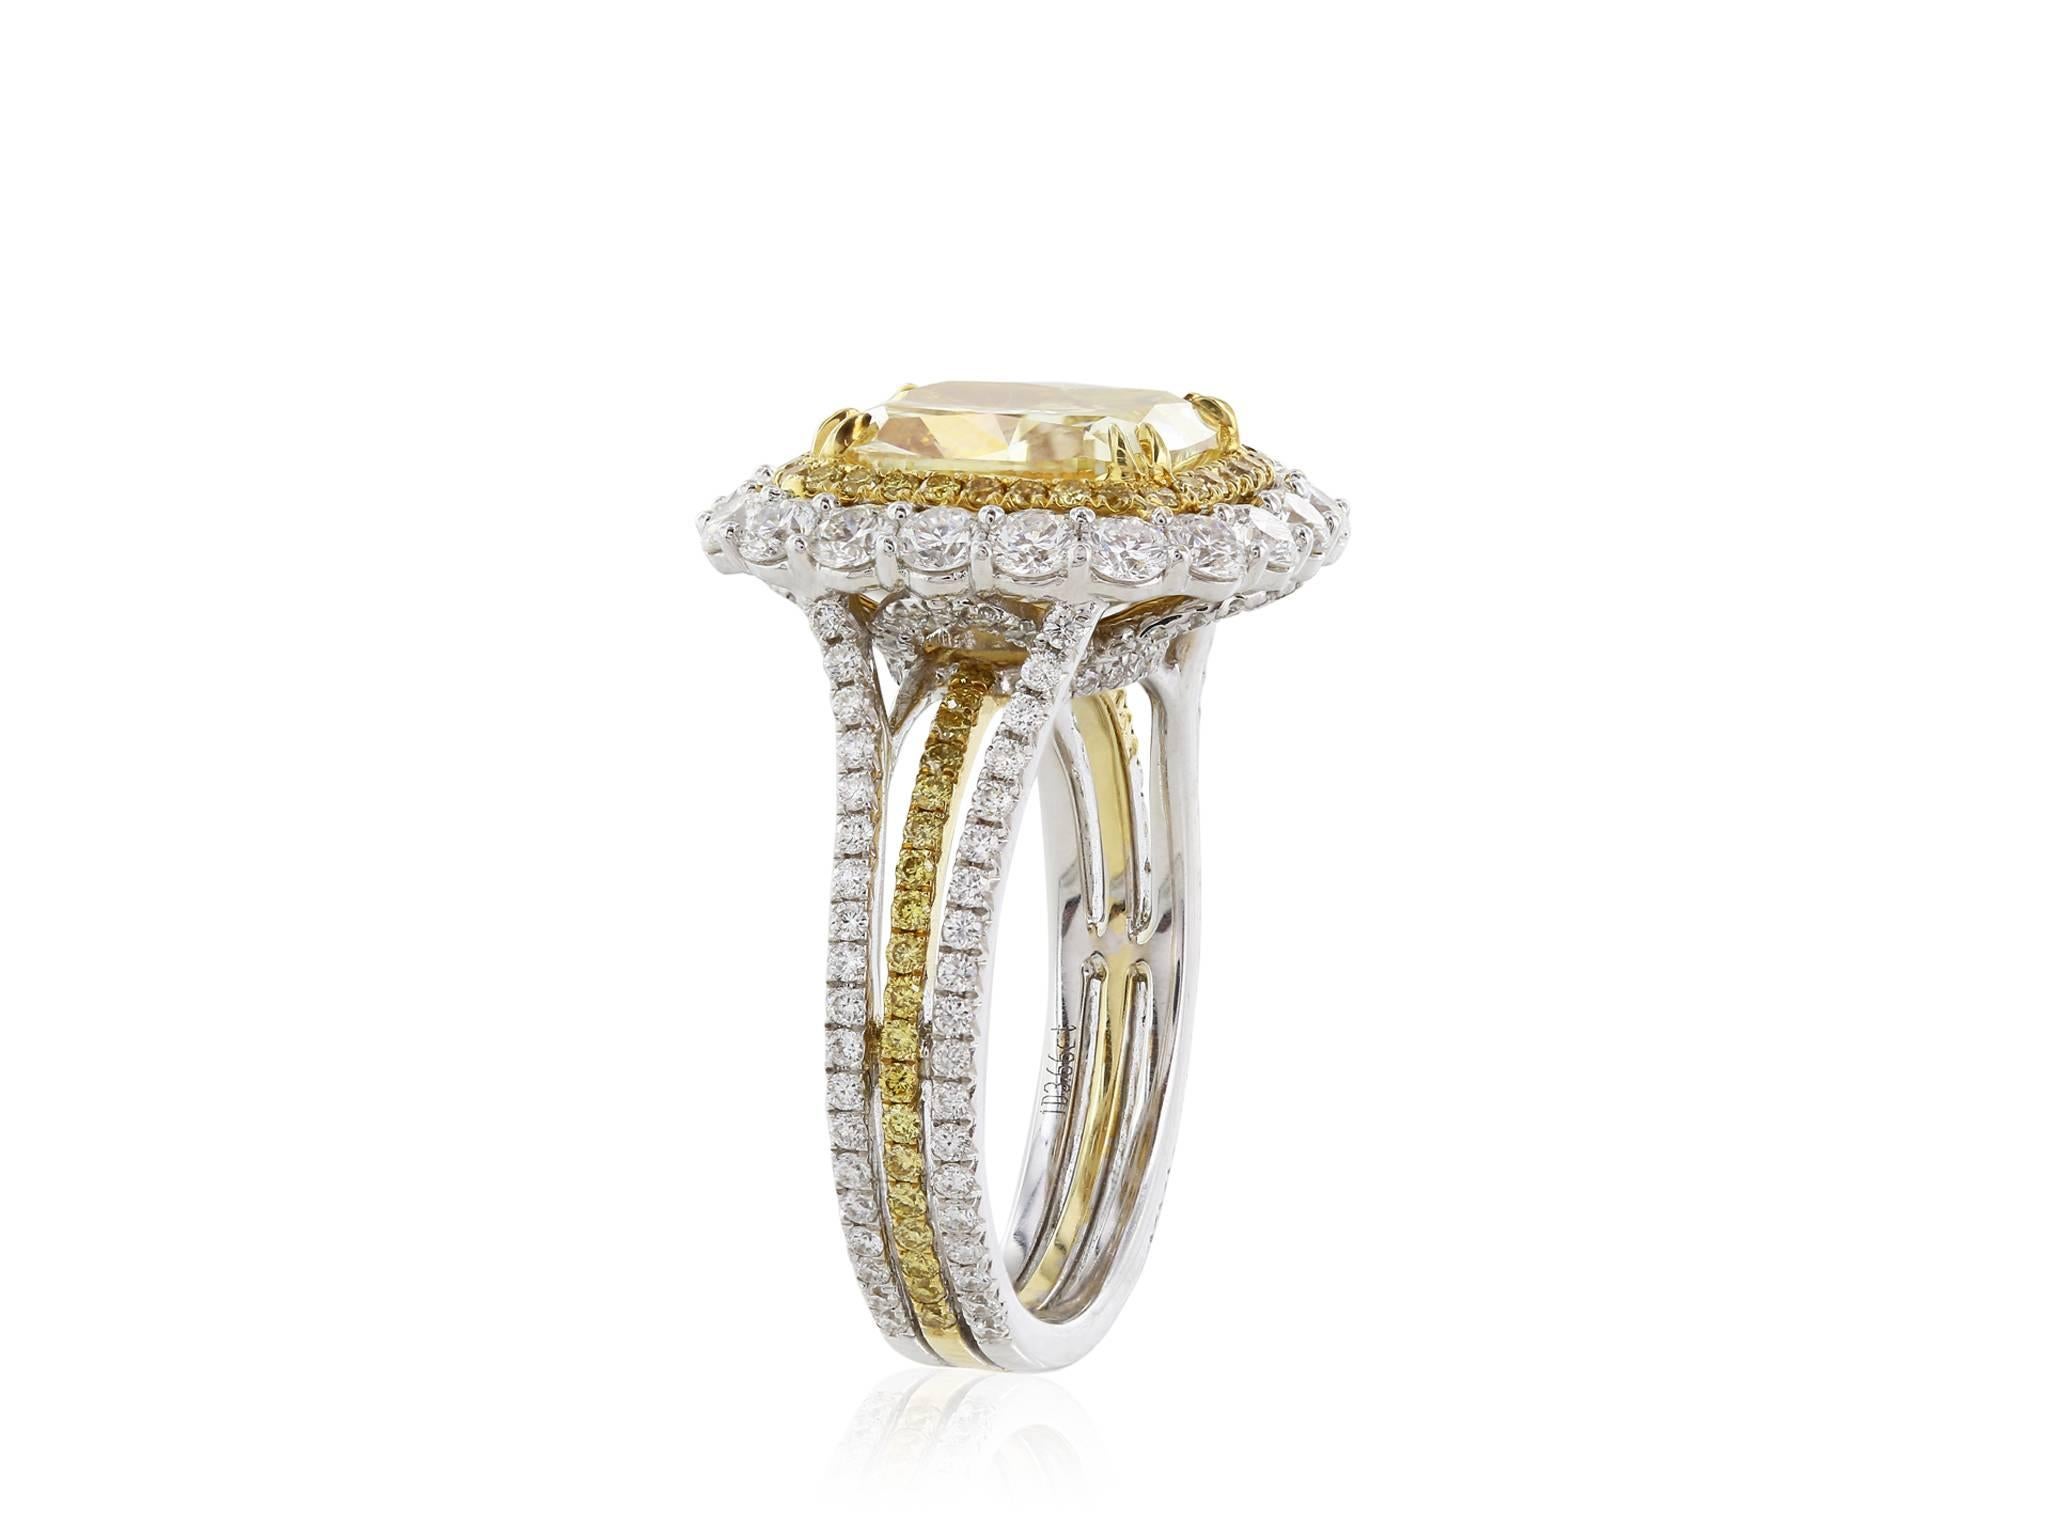 18 Karat white gold diamond halo ring featuring a 3.66 carat radiant cut GIA certified Fancy Yellow diamond with a clarity of SI1.  The diamond is surrounded by two halos of round brilliant cut diamonds.  One has diamonds with a color of fancy